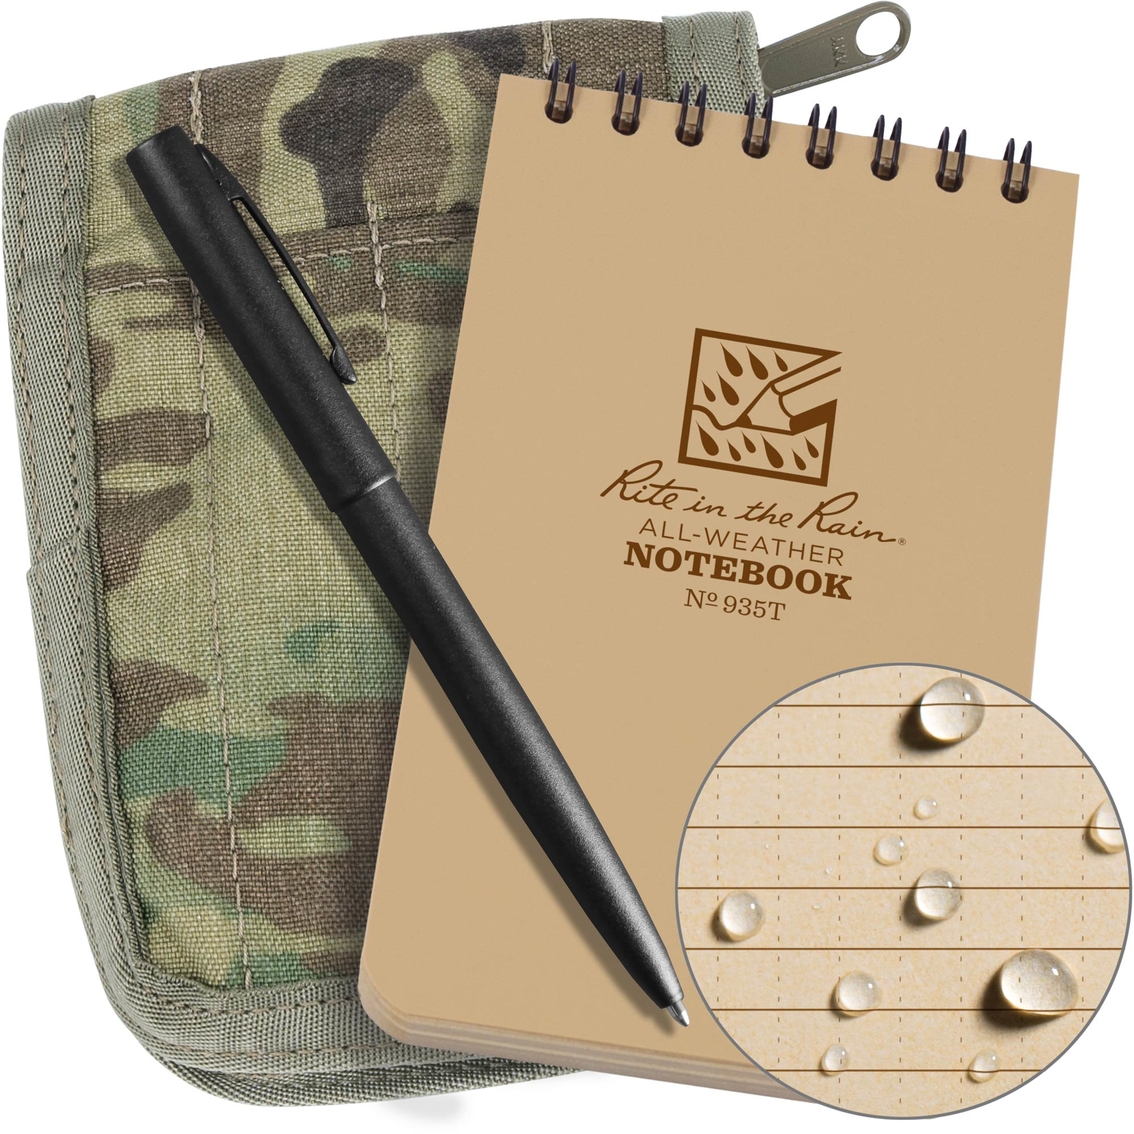 RITE IN THE RAIN 980M KIT ALL WEATHER 5x7 NOTEBOOK PEN & CARRYING CASE MULTICAM